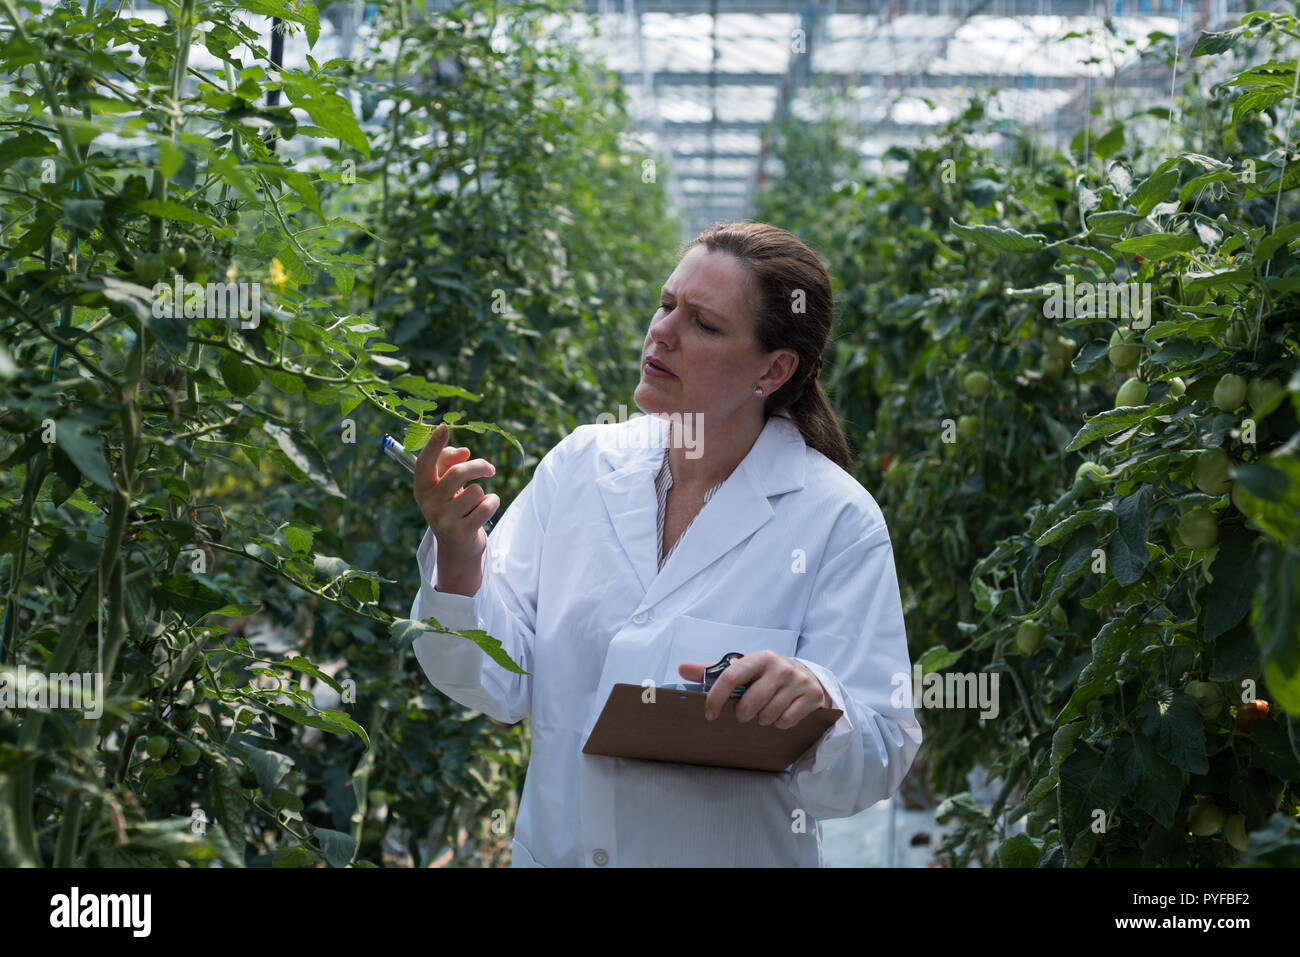 Scientist examining plants in greenhouse Banque D'Images